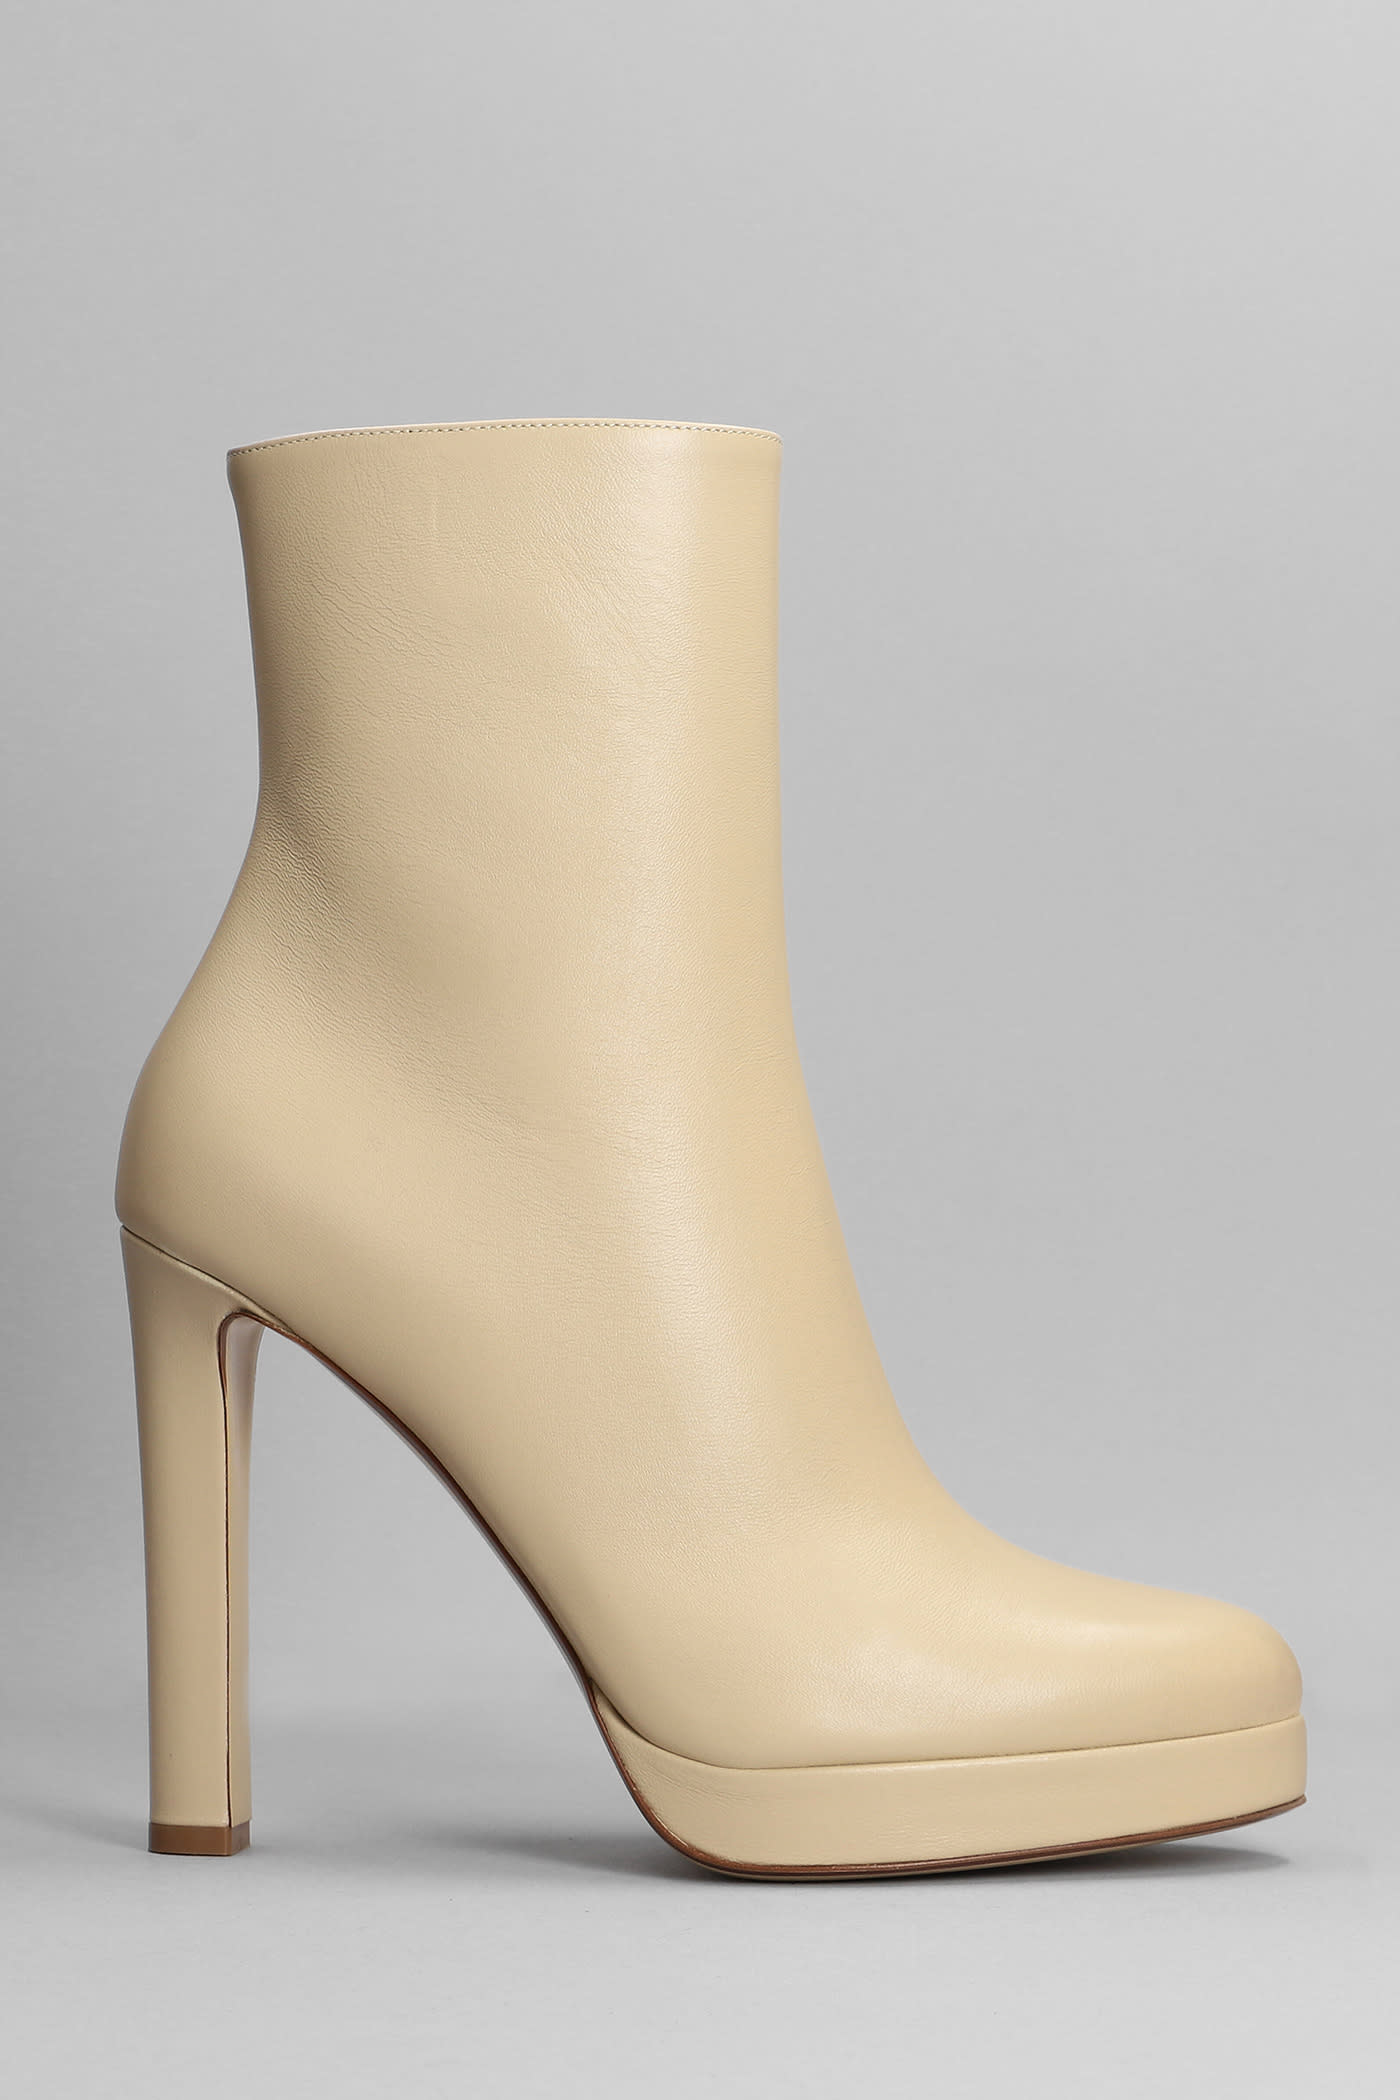 Francesco Russo High Heels Ankle Boots In Beige Leather